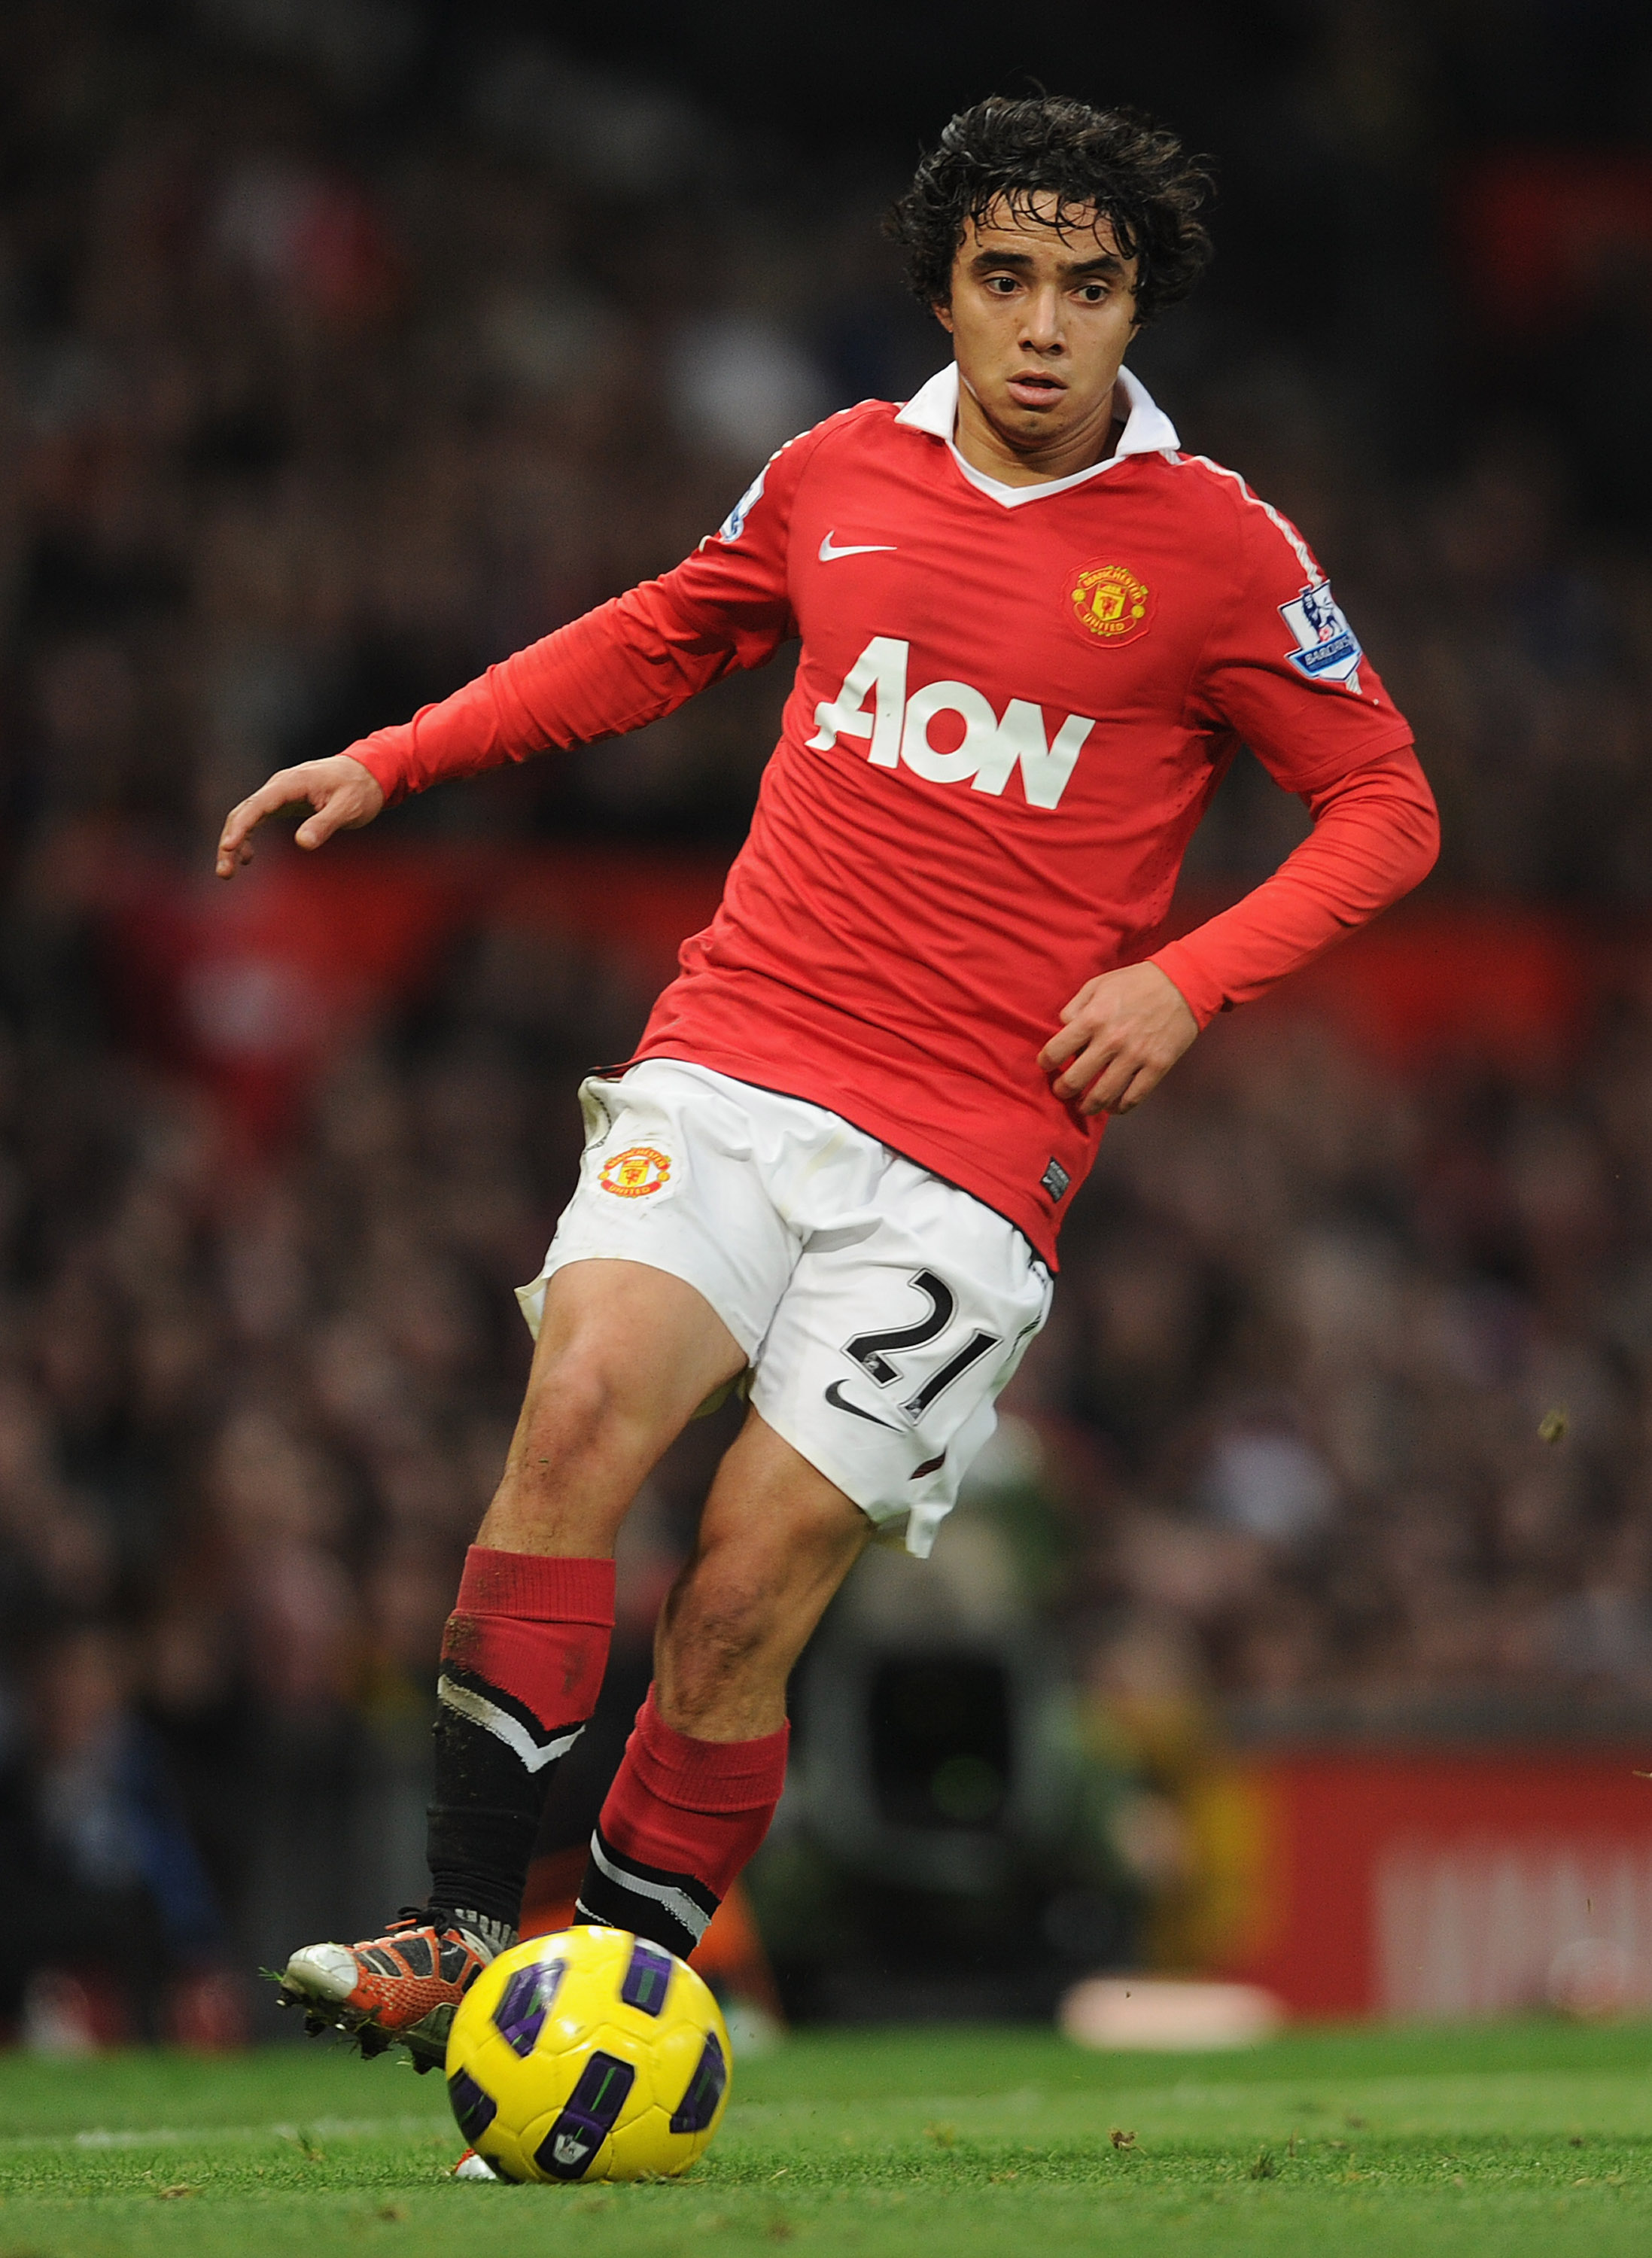 MANCHESTER, ENGLAND - NOVEMBER 20: Rafael Da Silva of Manchester United plays the ball during the Barclays Premier League match between Manchester United and Wigan Athletic at Old Trafford on November 20, 2010 in Manchester, England.  (Photo by Michael Re